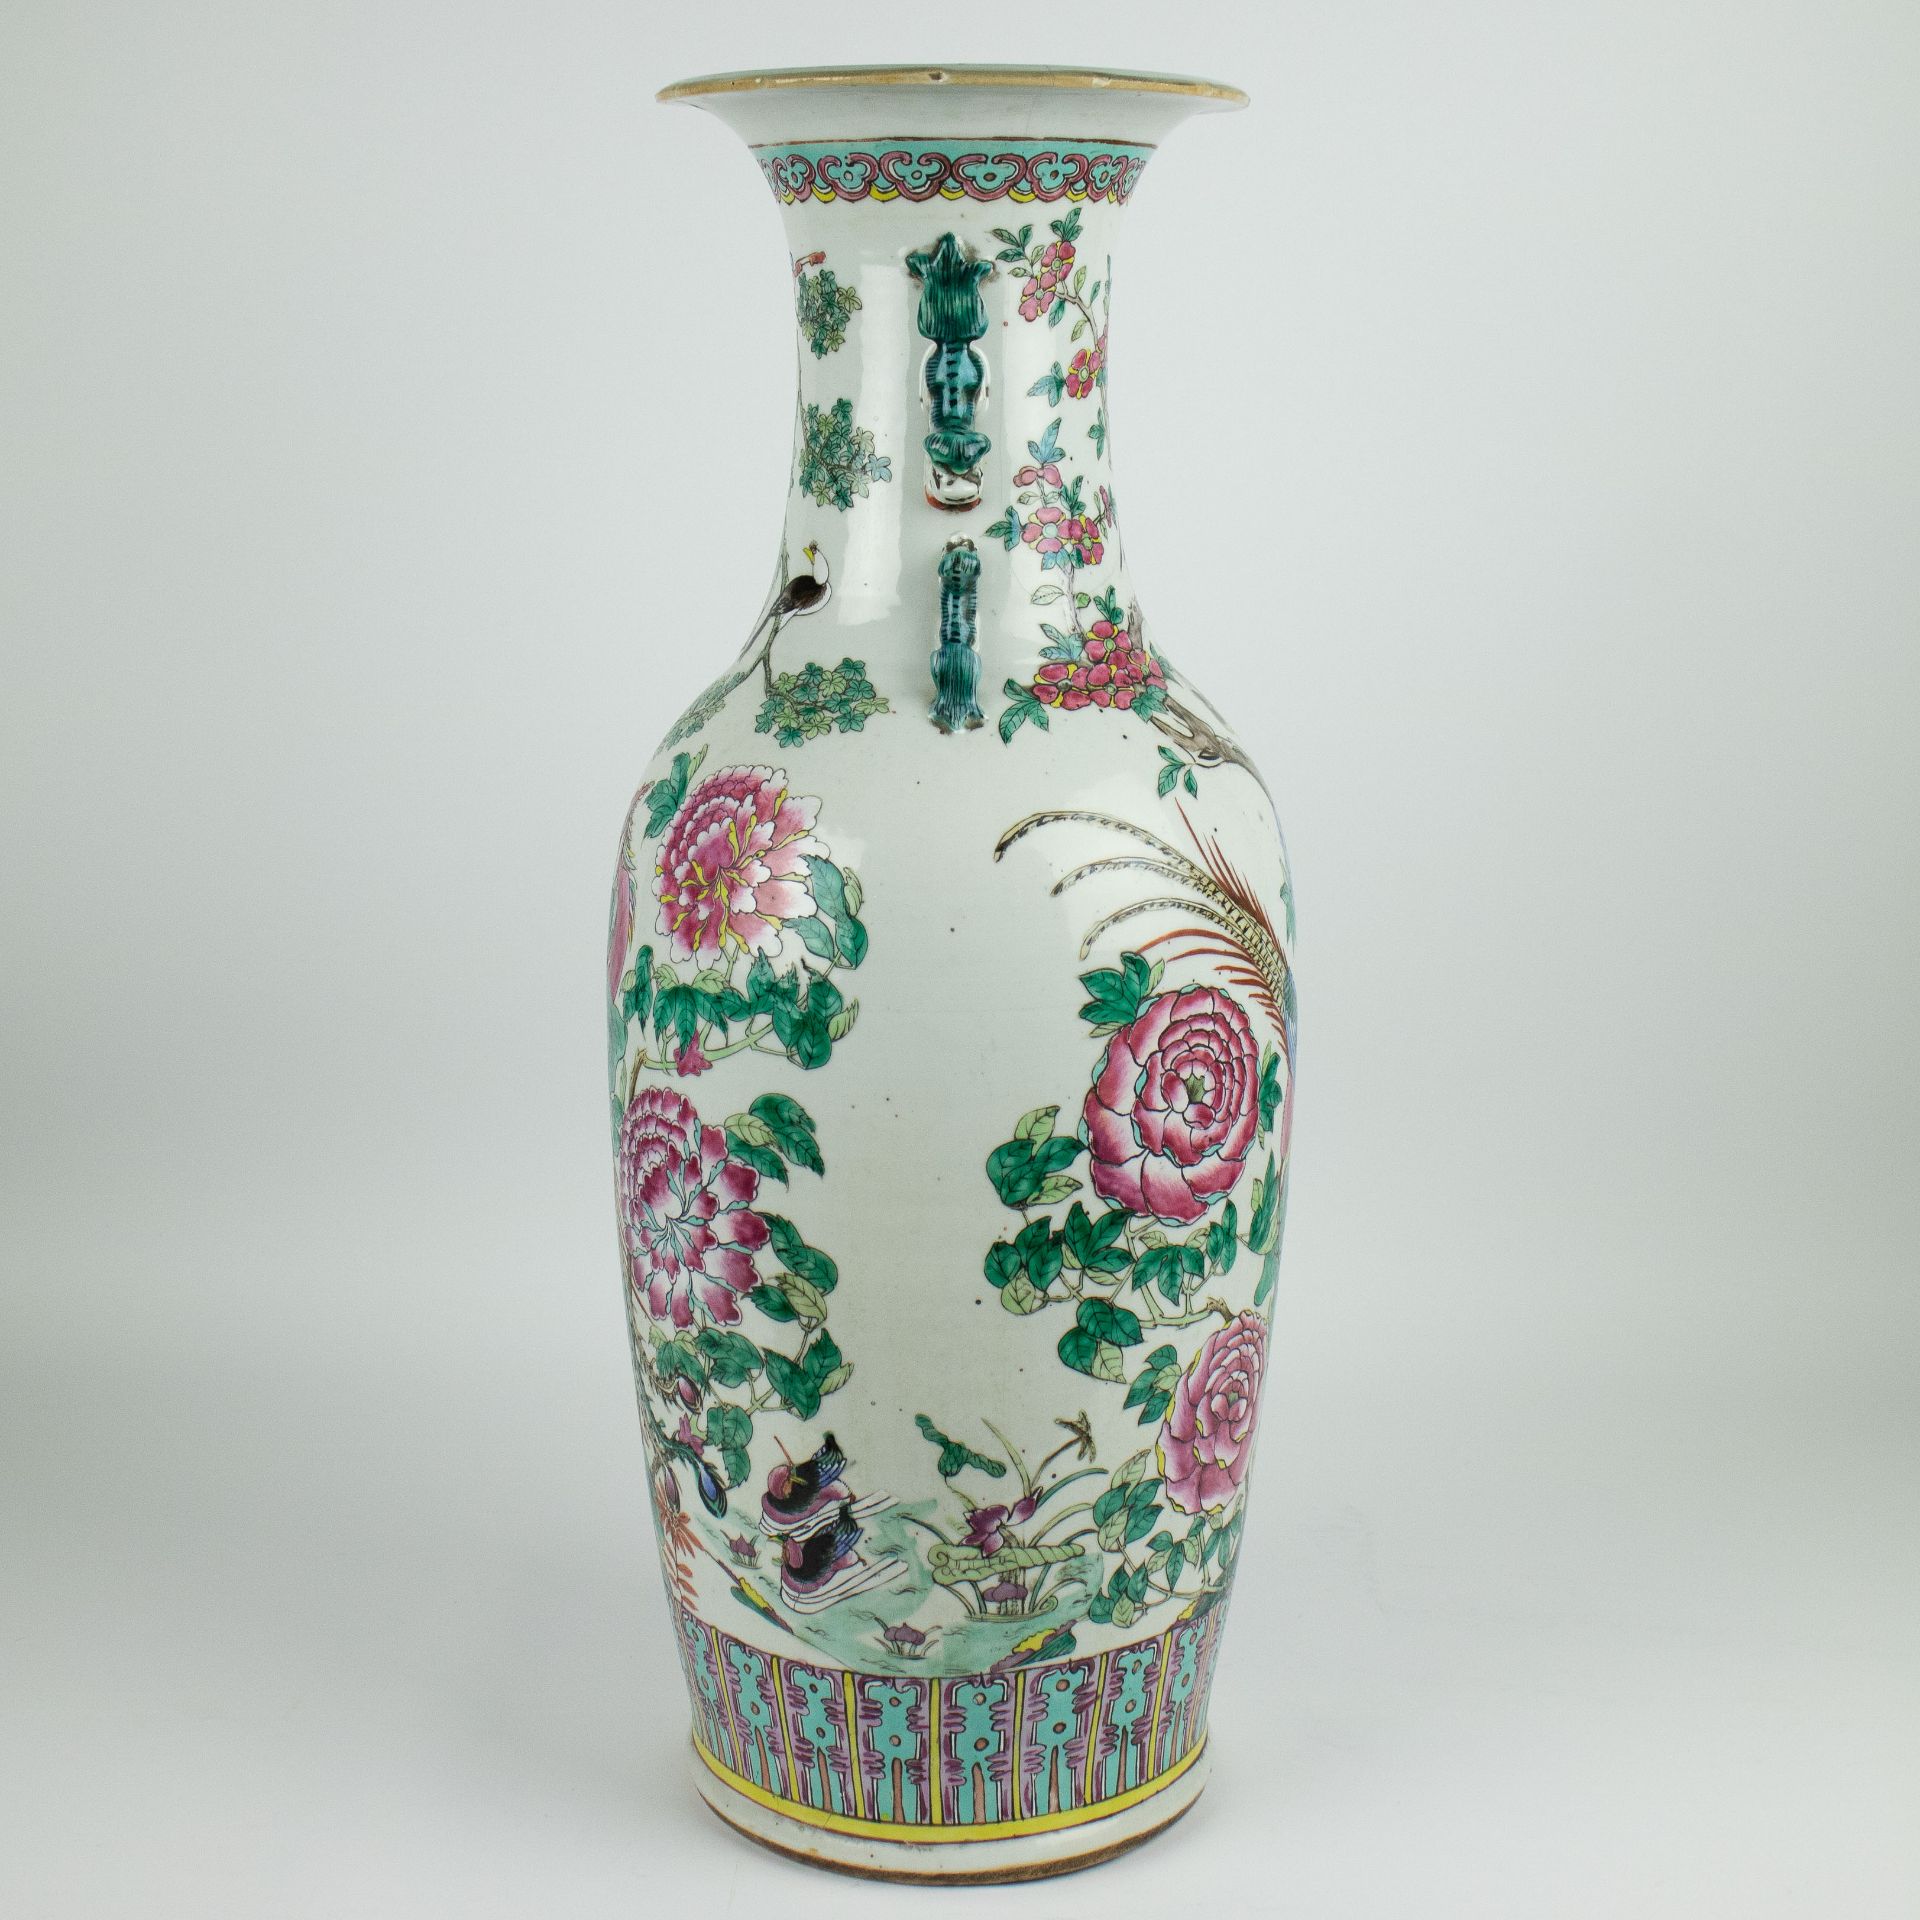 A Chinese vase 2nd half 19th century - Image 4 of 8